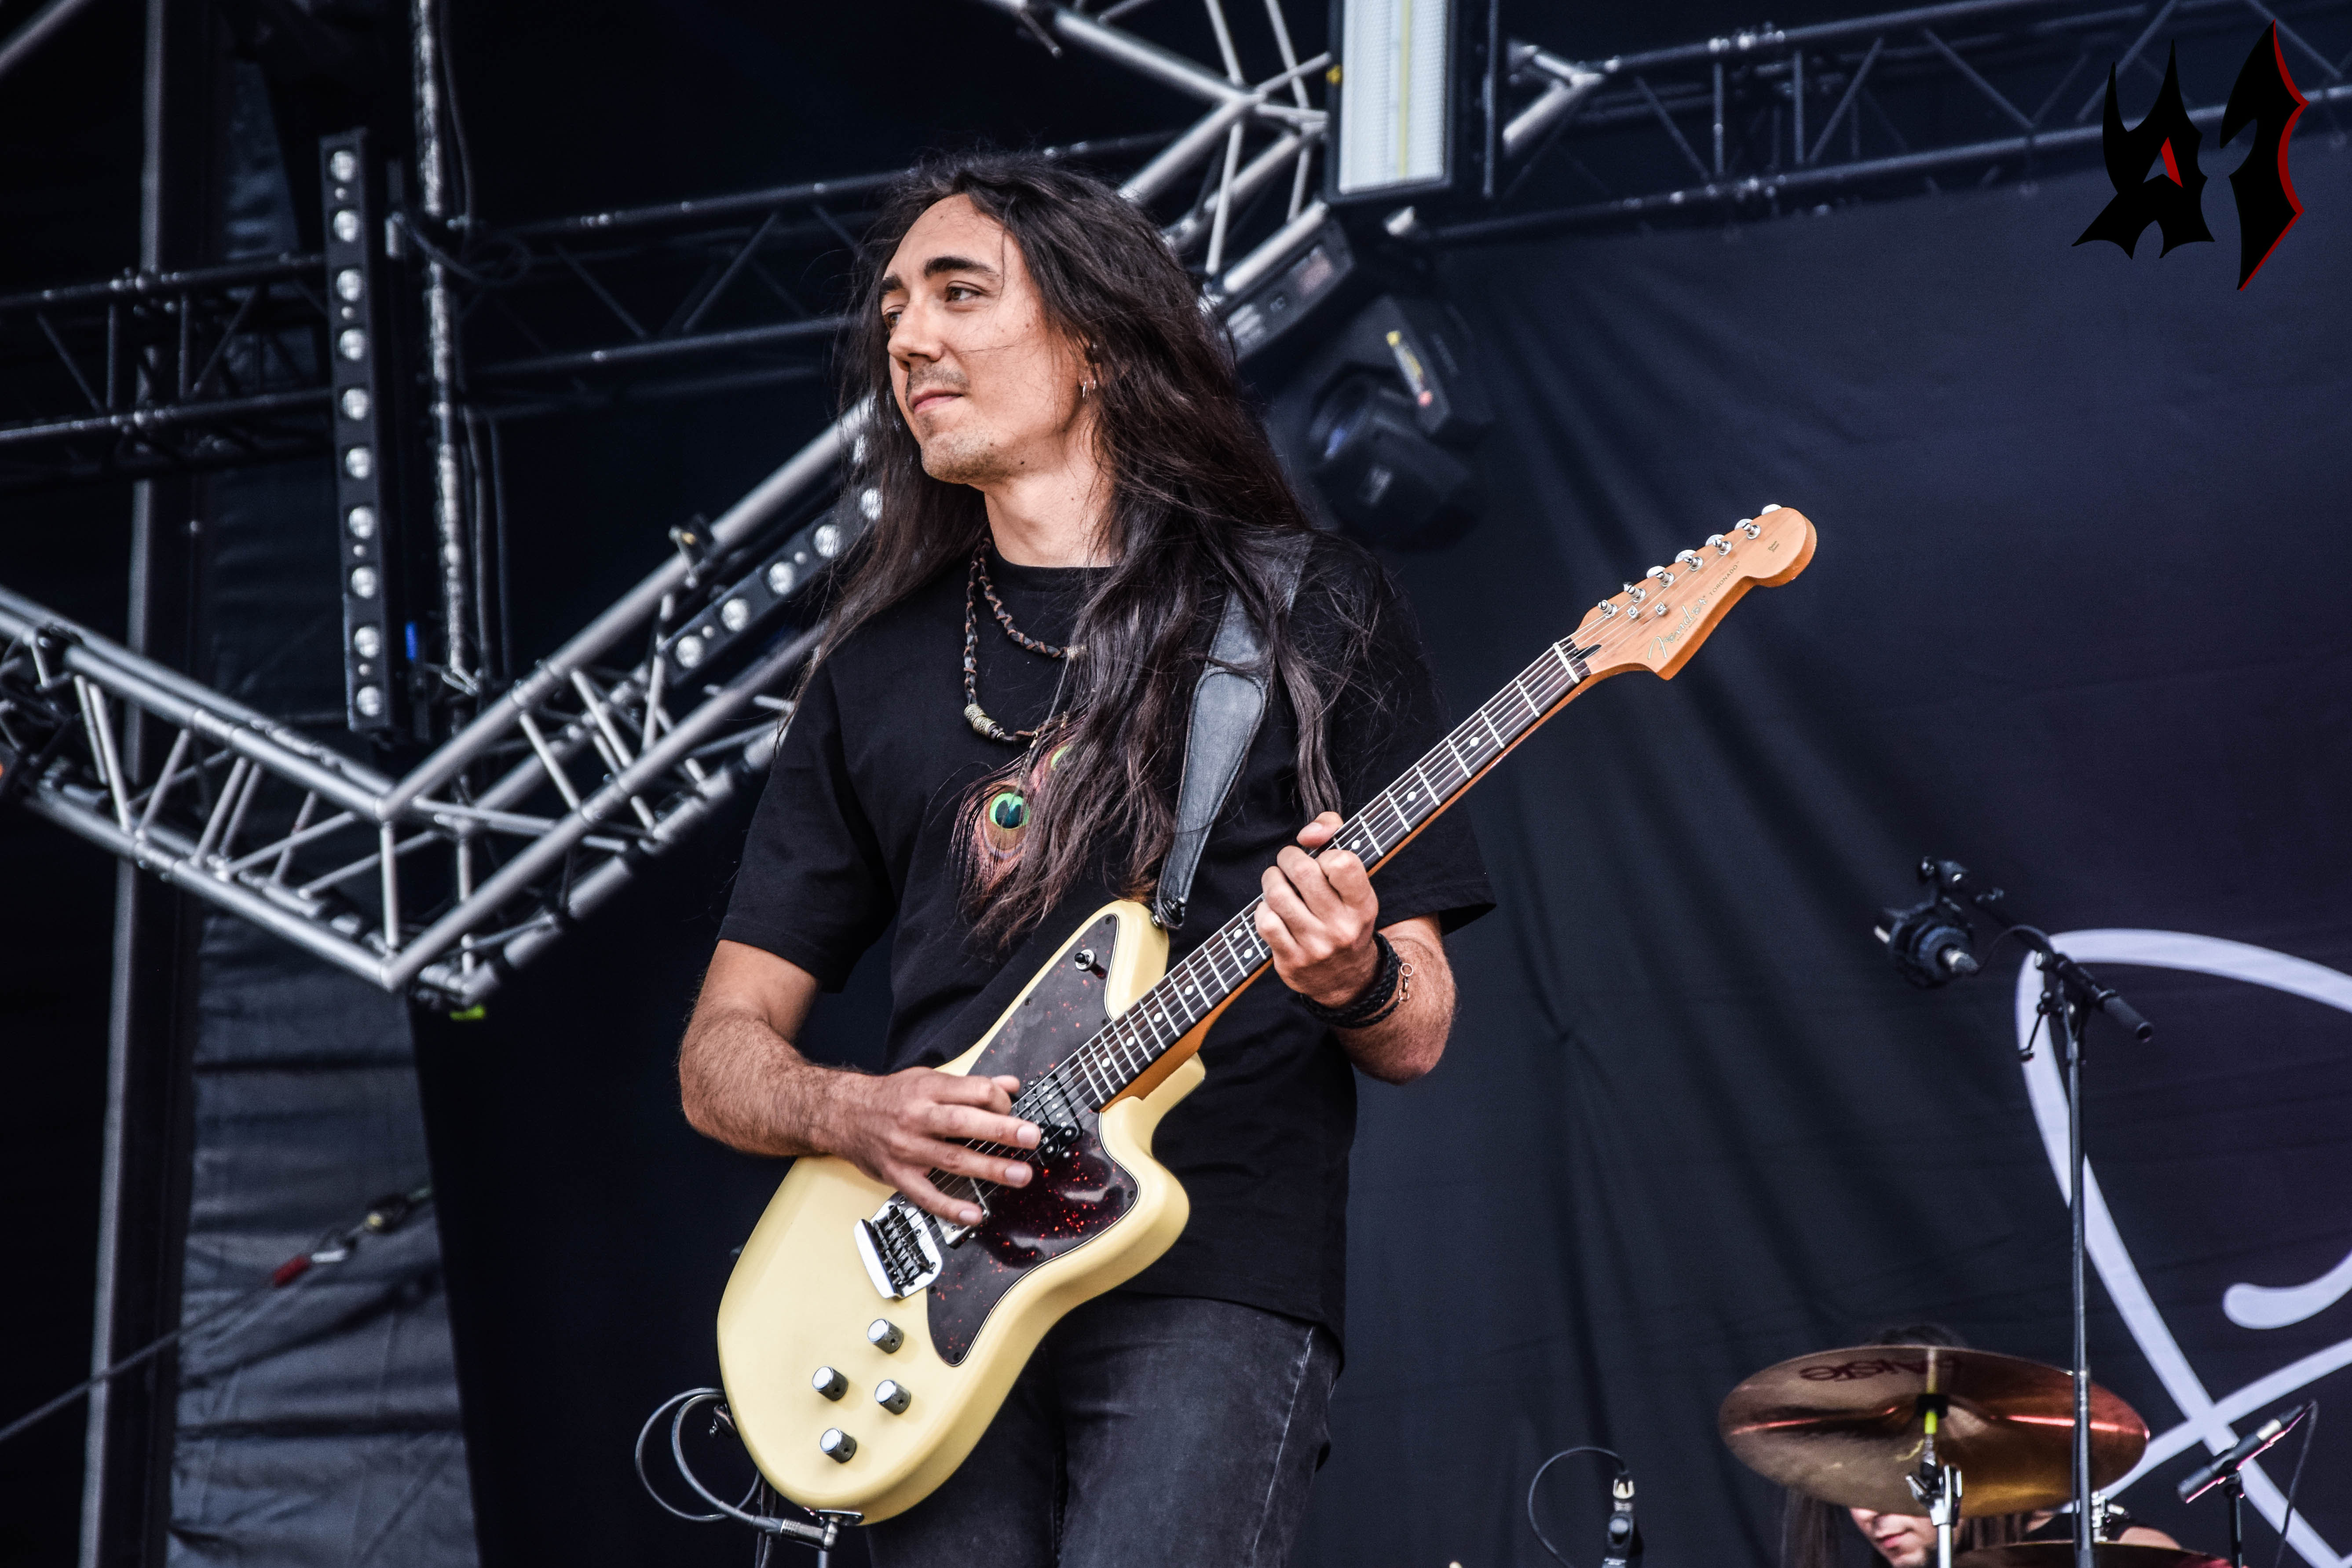 Donwload 2018 – Day 2 - Alcest 10